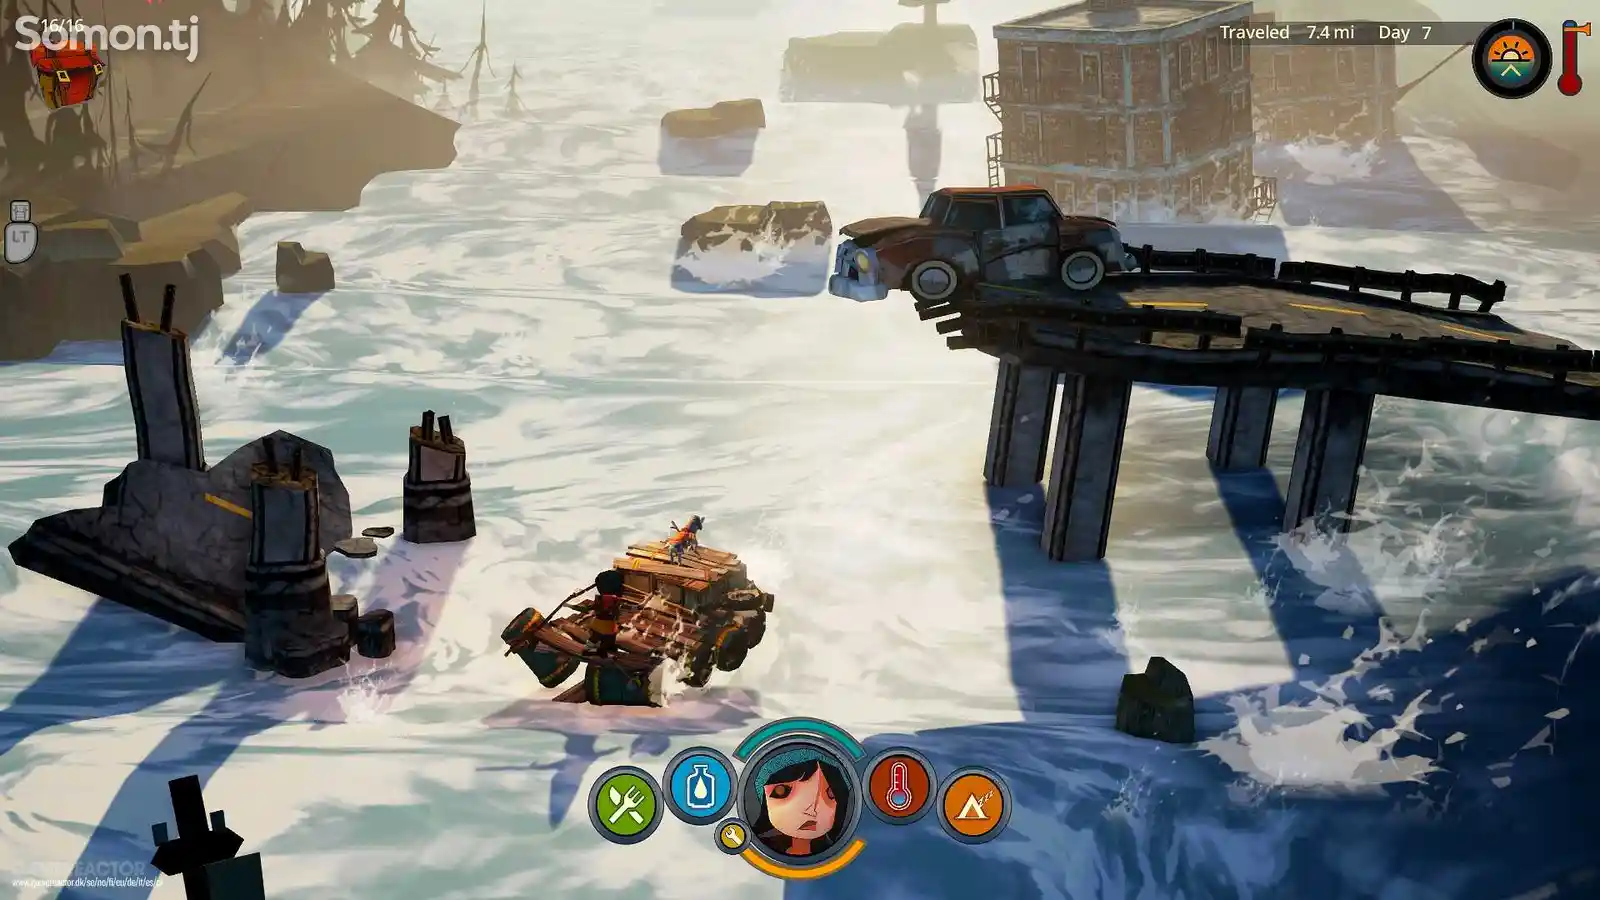 Игра The flame in the flood для PS-4 / 5.05 / 6.72 / 7.02 / 7.55 / 9.00 /-3